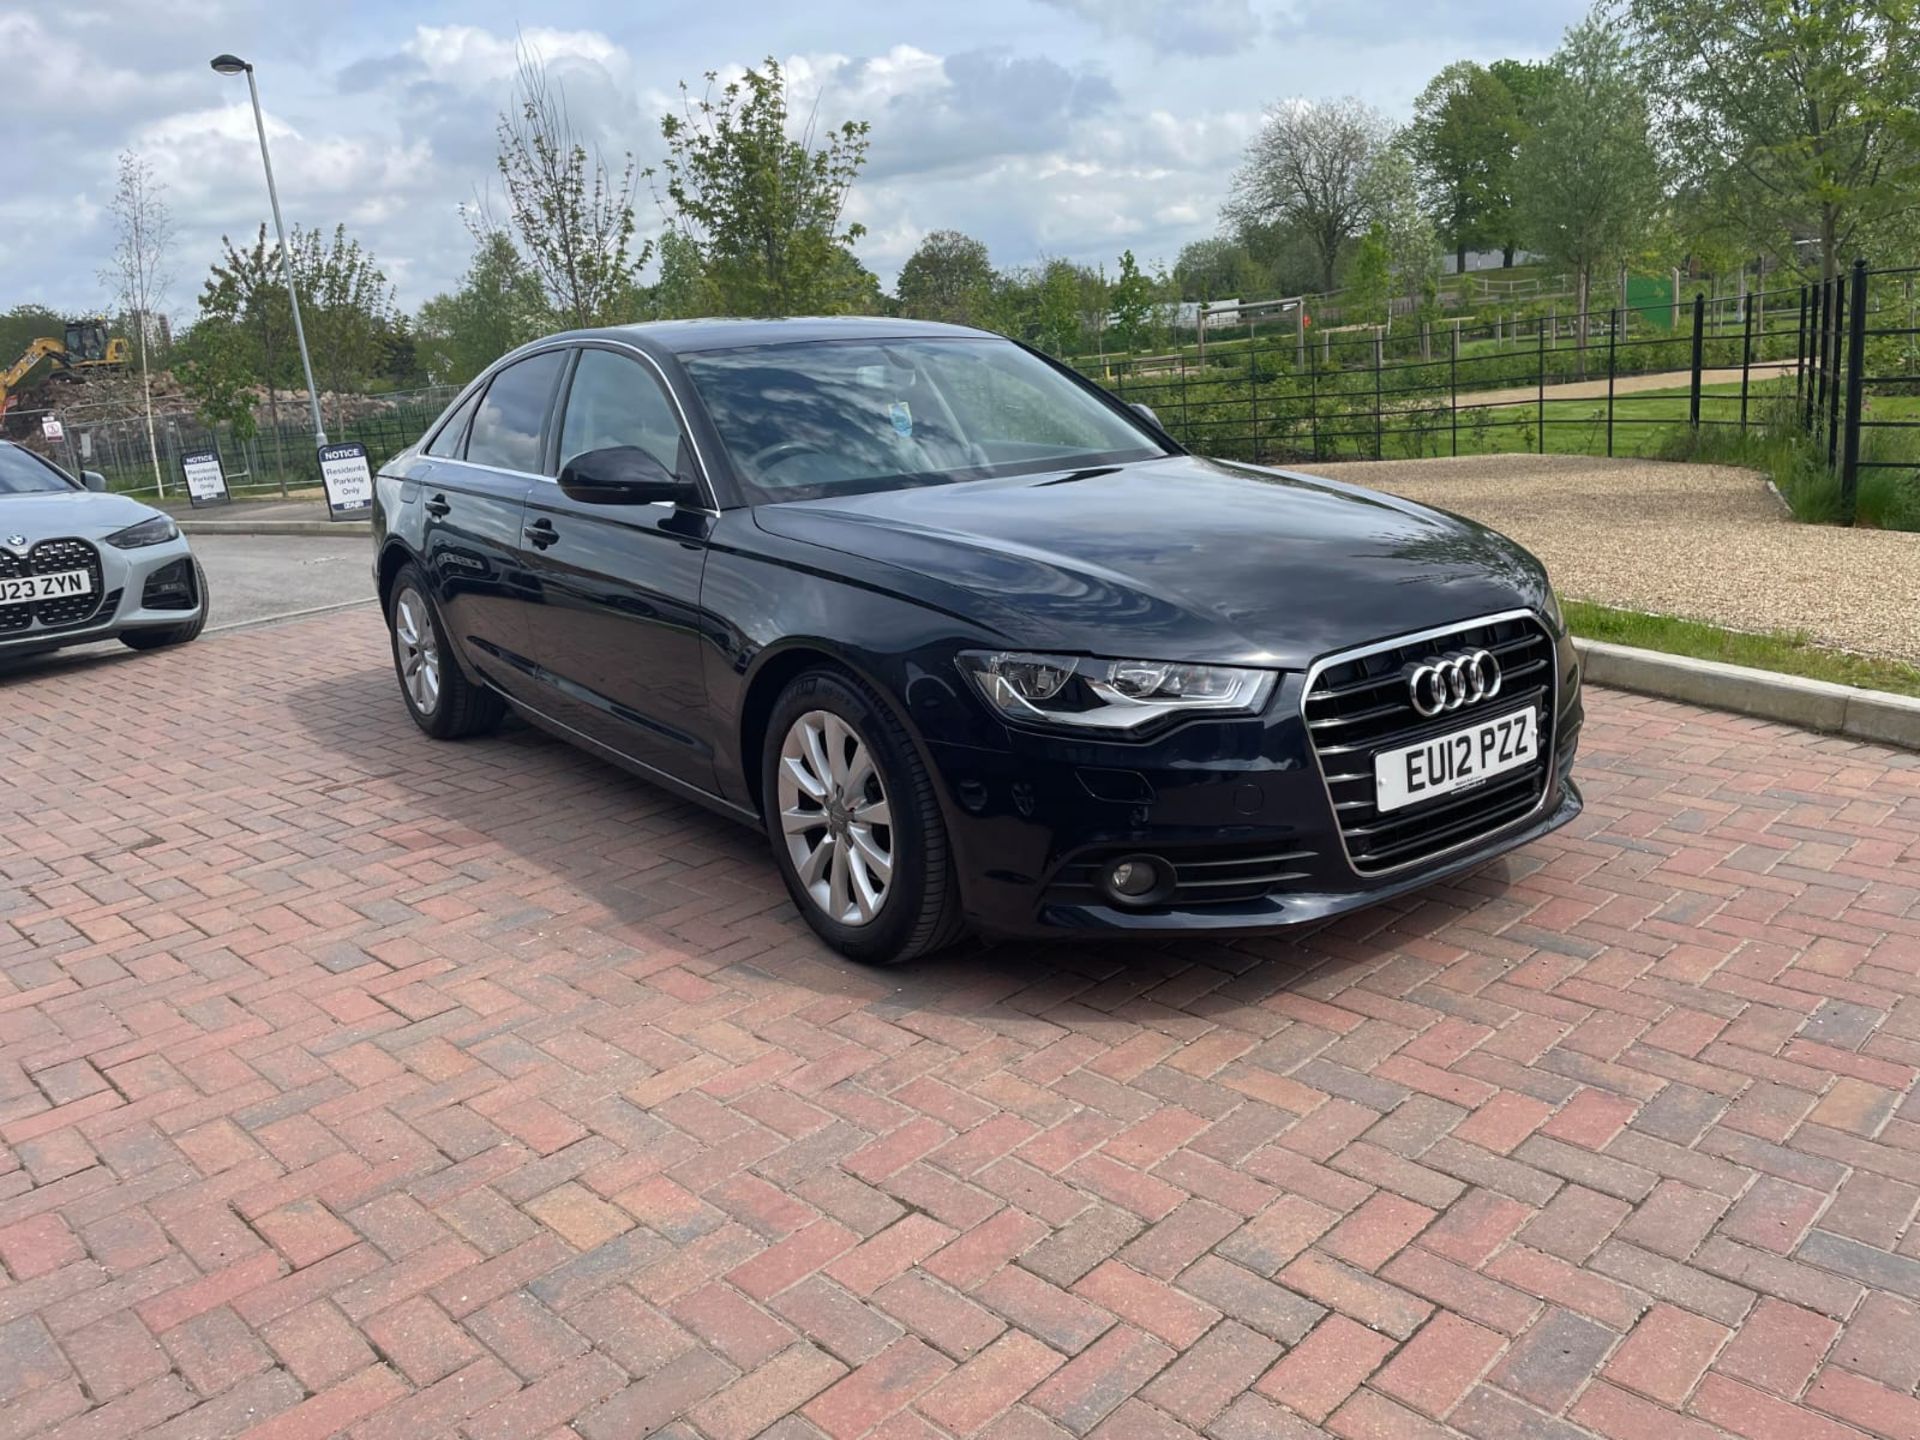 2012 AUDI A6 2.0TDI AUTOMATIC 7 SPEED SALOON - FULL SERVICE HISTORY - Image 3 of 15